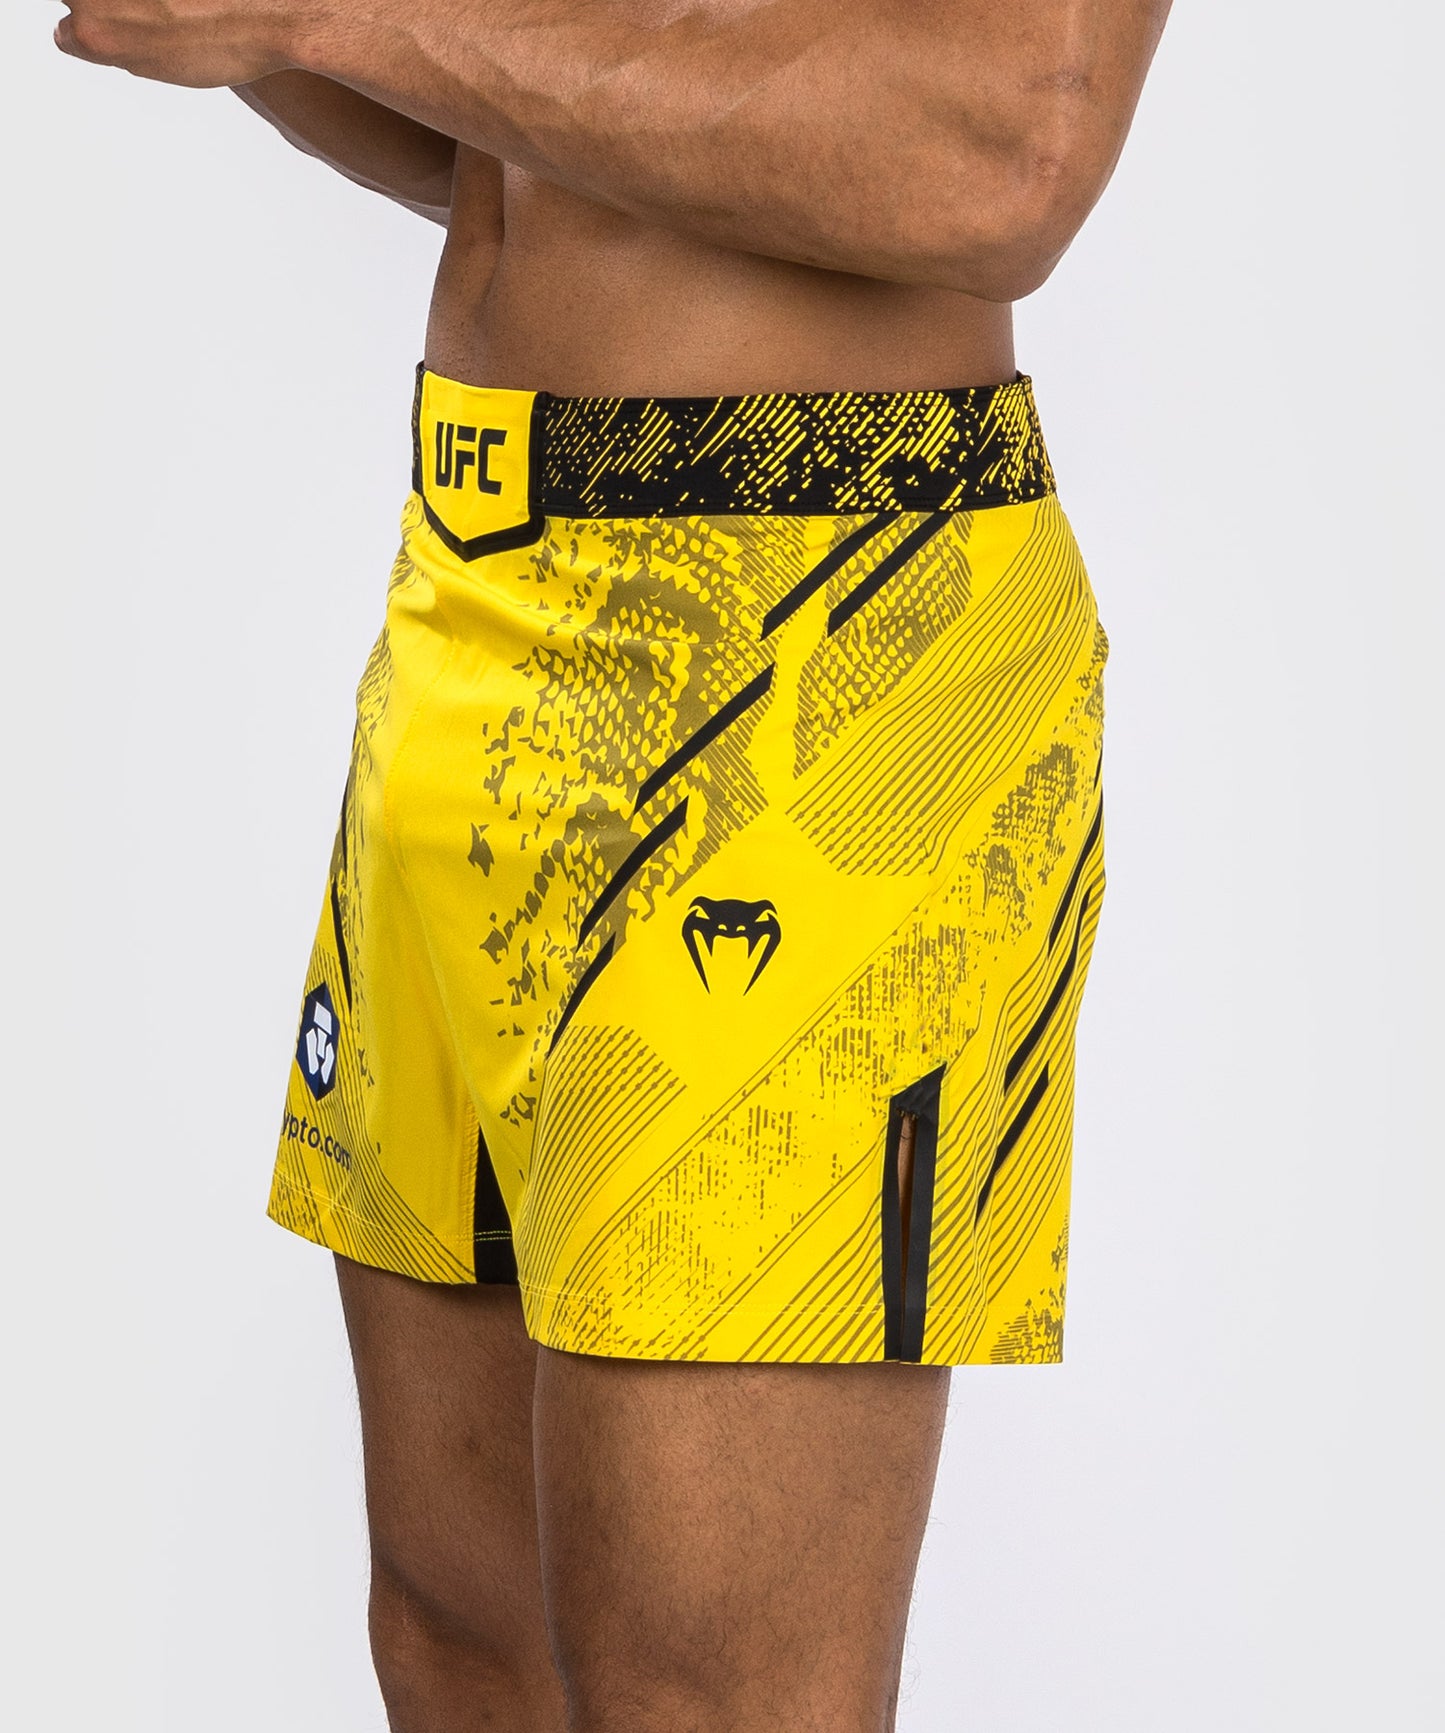 UFC Adrenaline by Venum Personalized Authentic Fight Night Men's Fight Short - Short Fit - Yellow